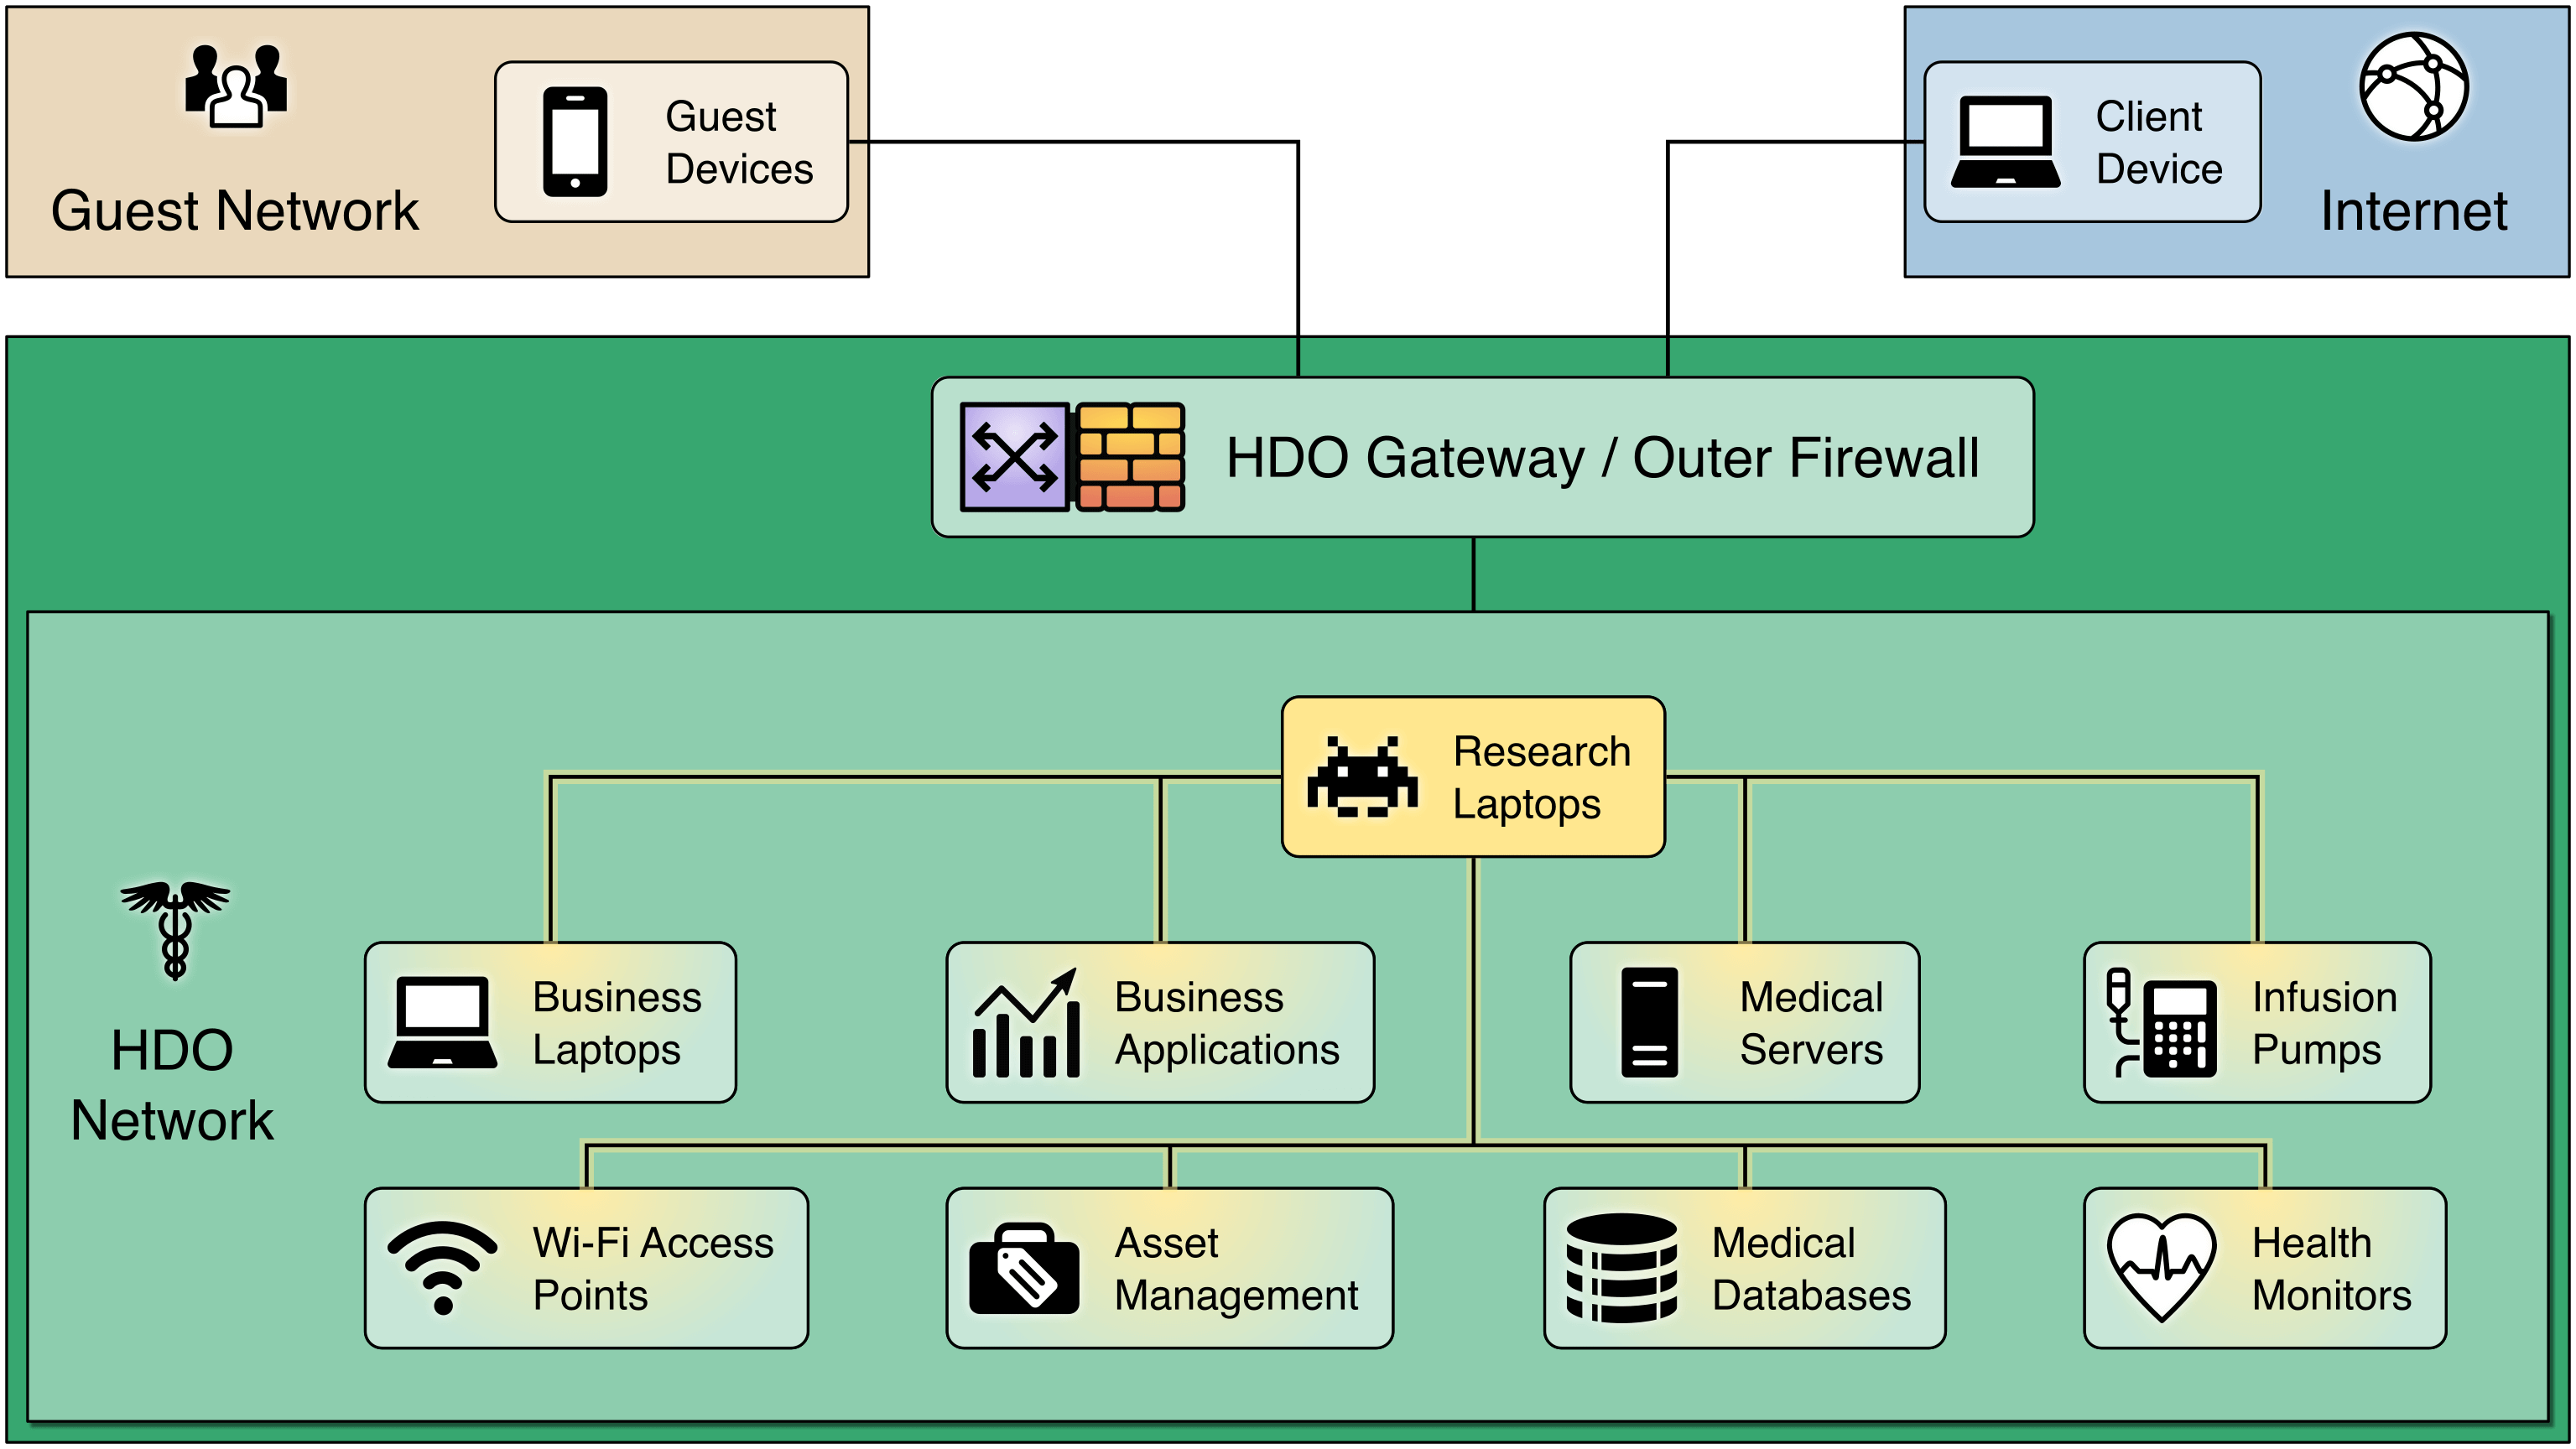 The image features the same architecture in the previous slide, but illustrates the external threat bypassing the HDO firewall, threatening all HDO enterprise devices.